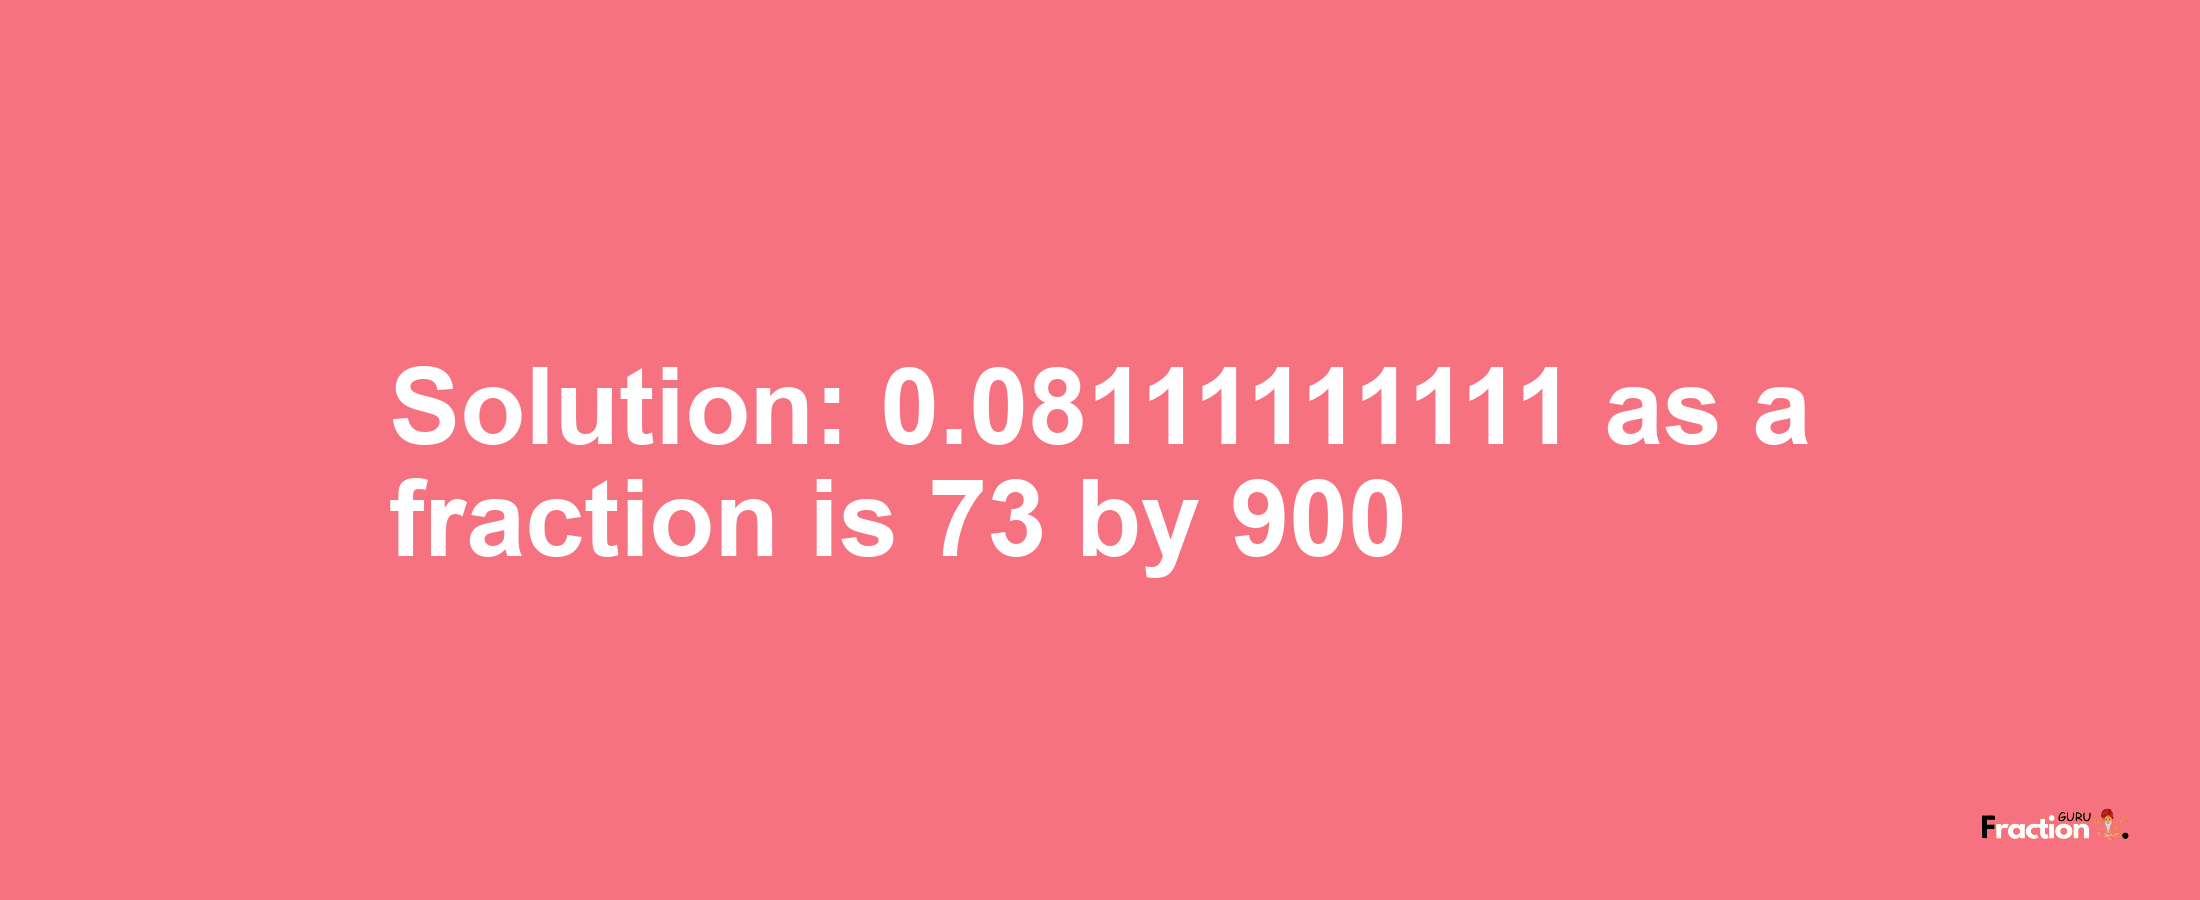 Solution:0.08111111111 as a fraction is 73/900